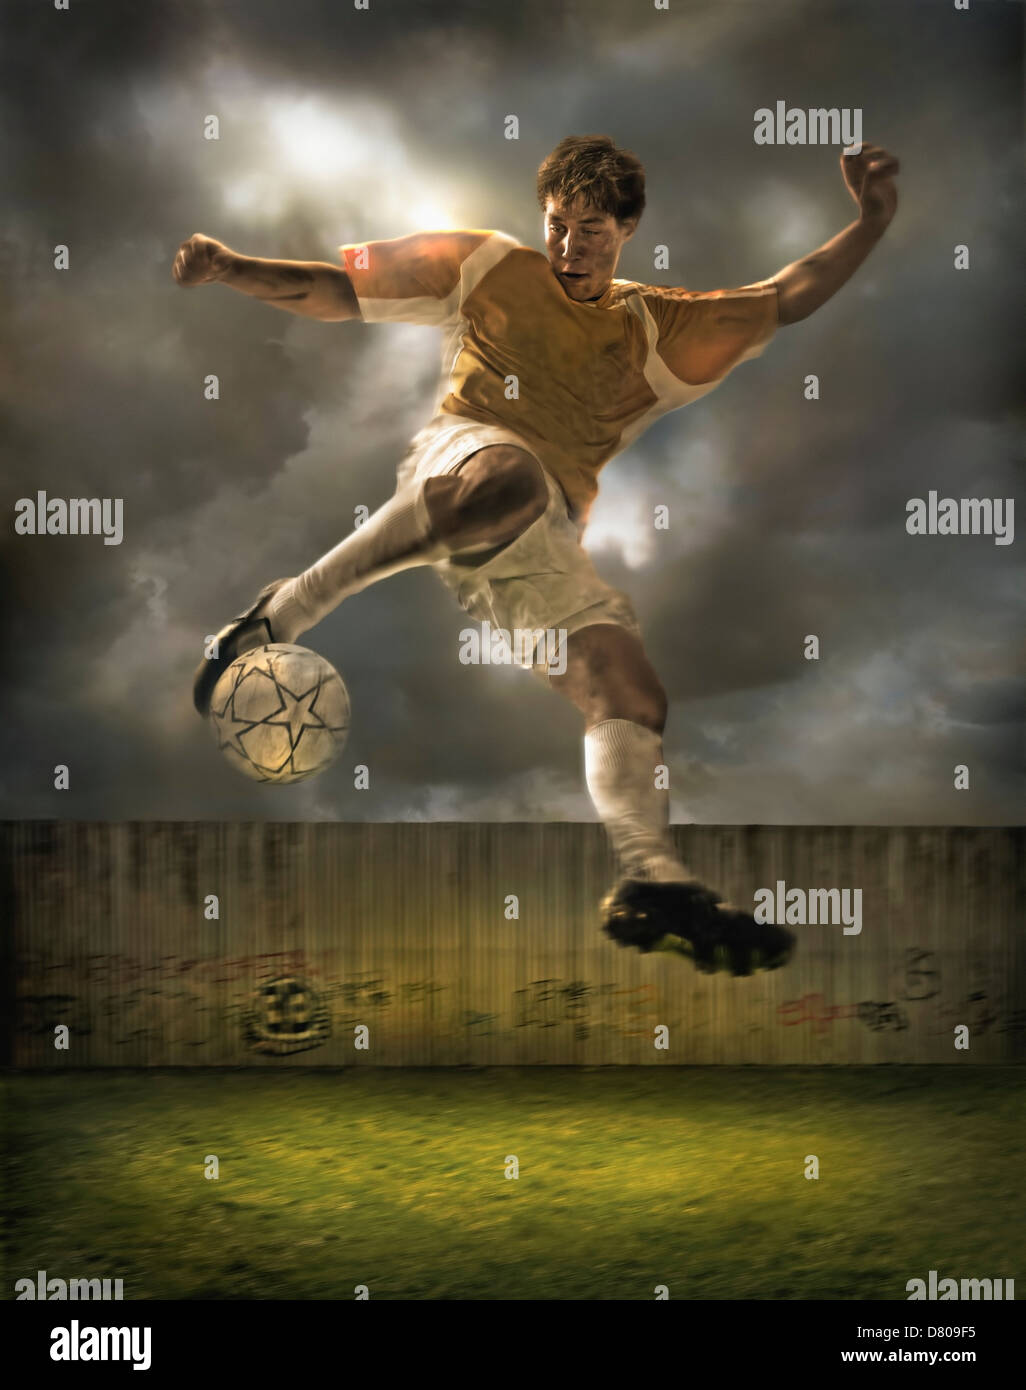 Illustration de soccer player kicking ball in field Banque D'Images